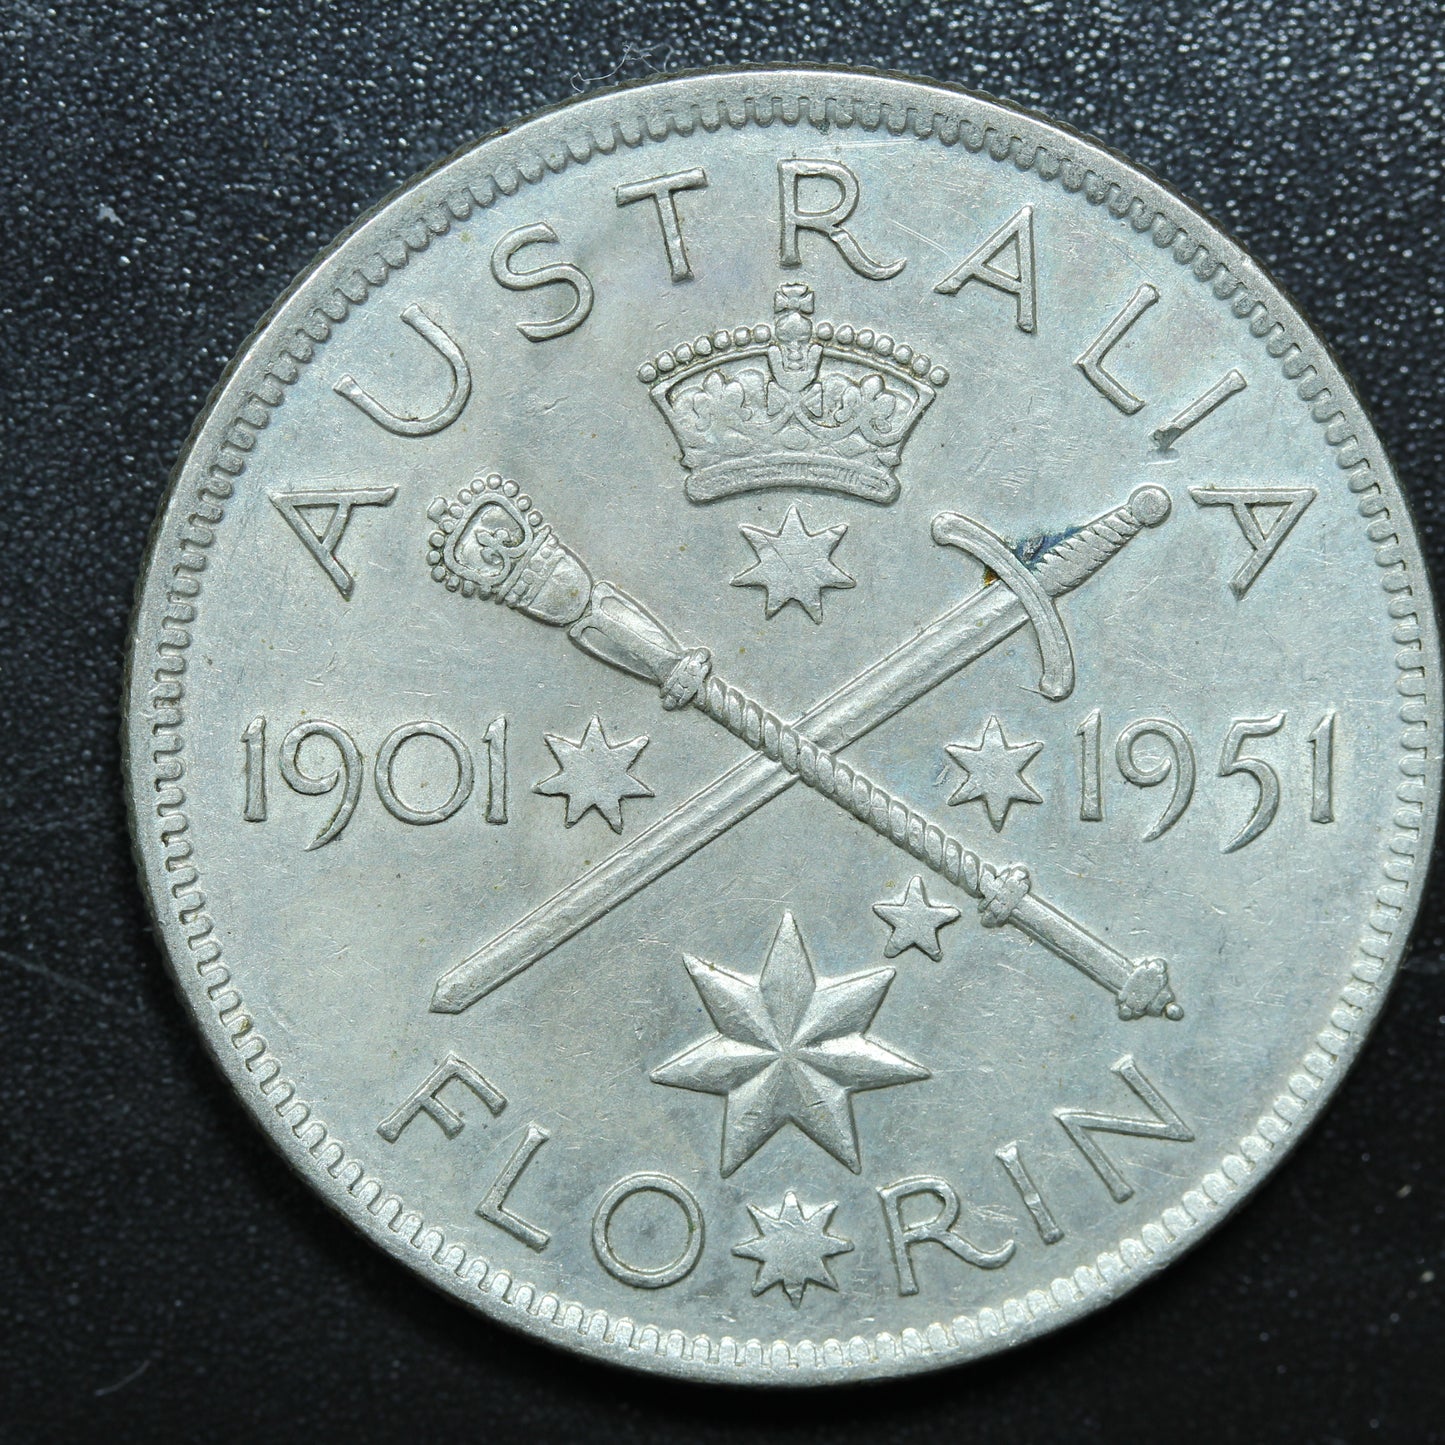 1951 Australia 1 Florin Silver Coin KM# 47 50 Years of Fed